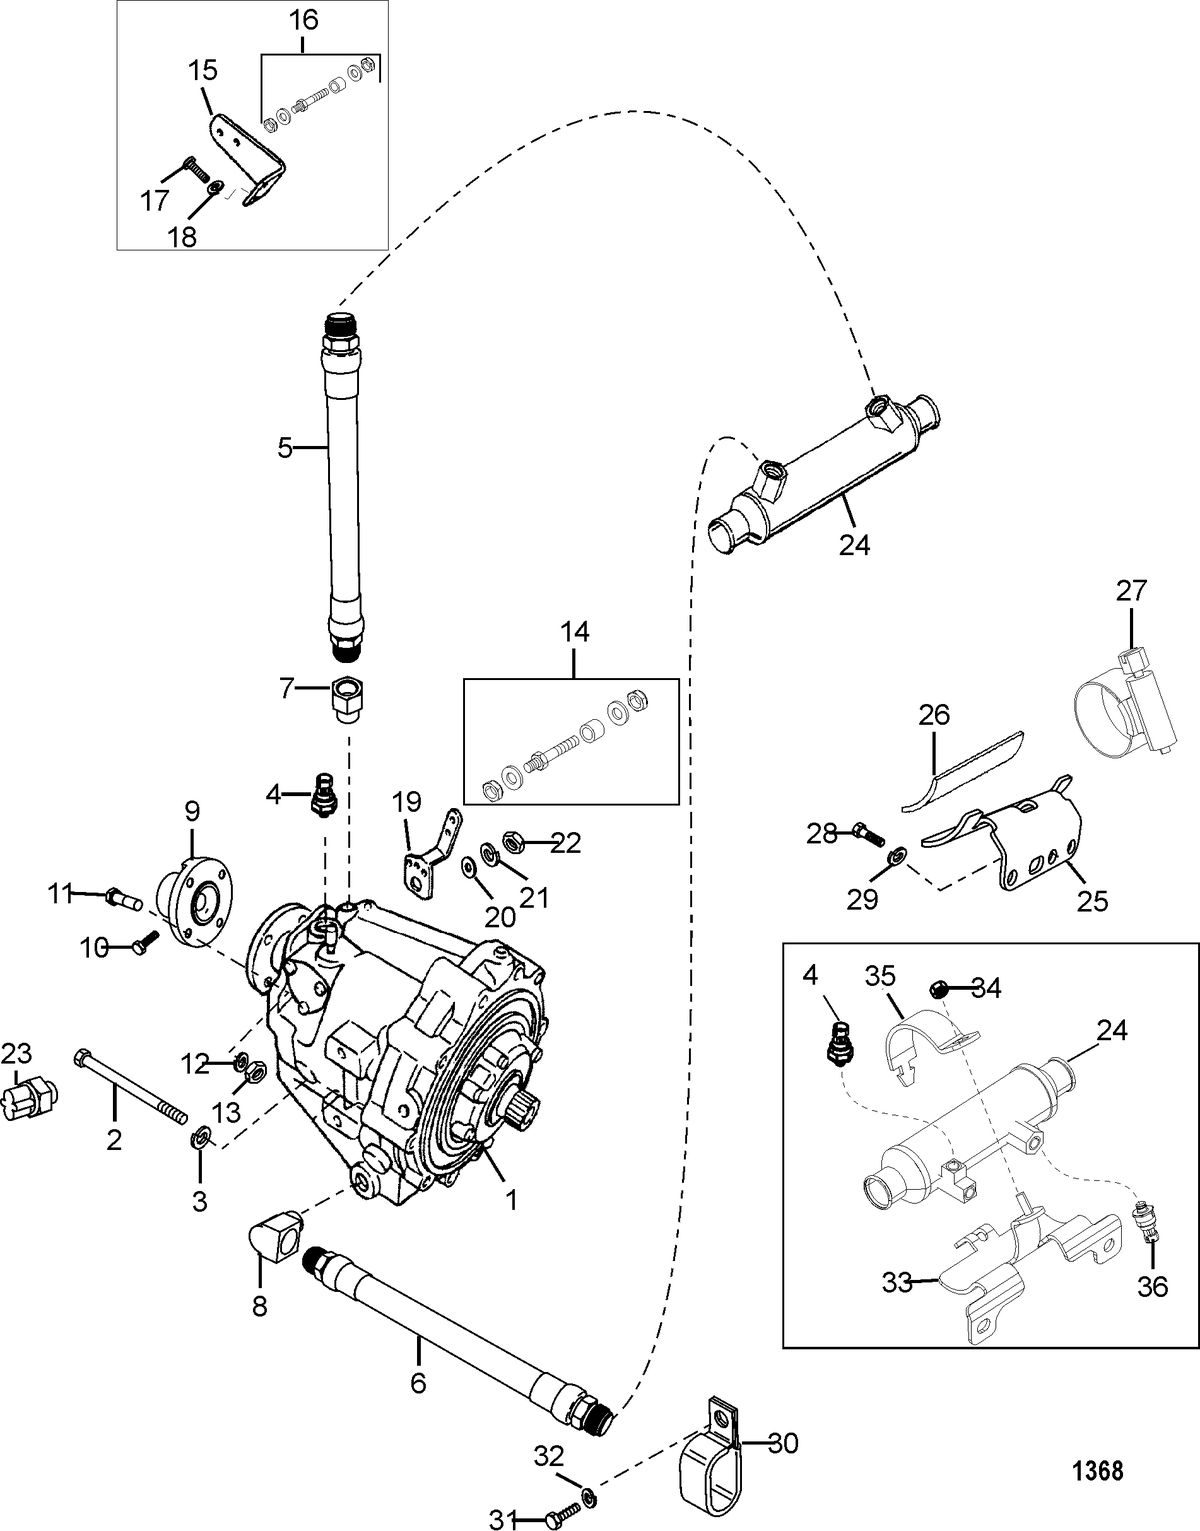 MERCRUISER 350 MAG MX 6.2L MPI INBOARD Transmission and Related Parts(BORG-WARNER 71C &72C)